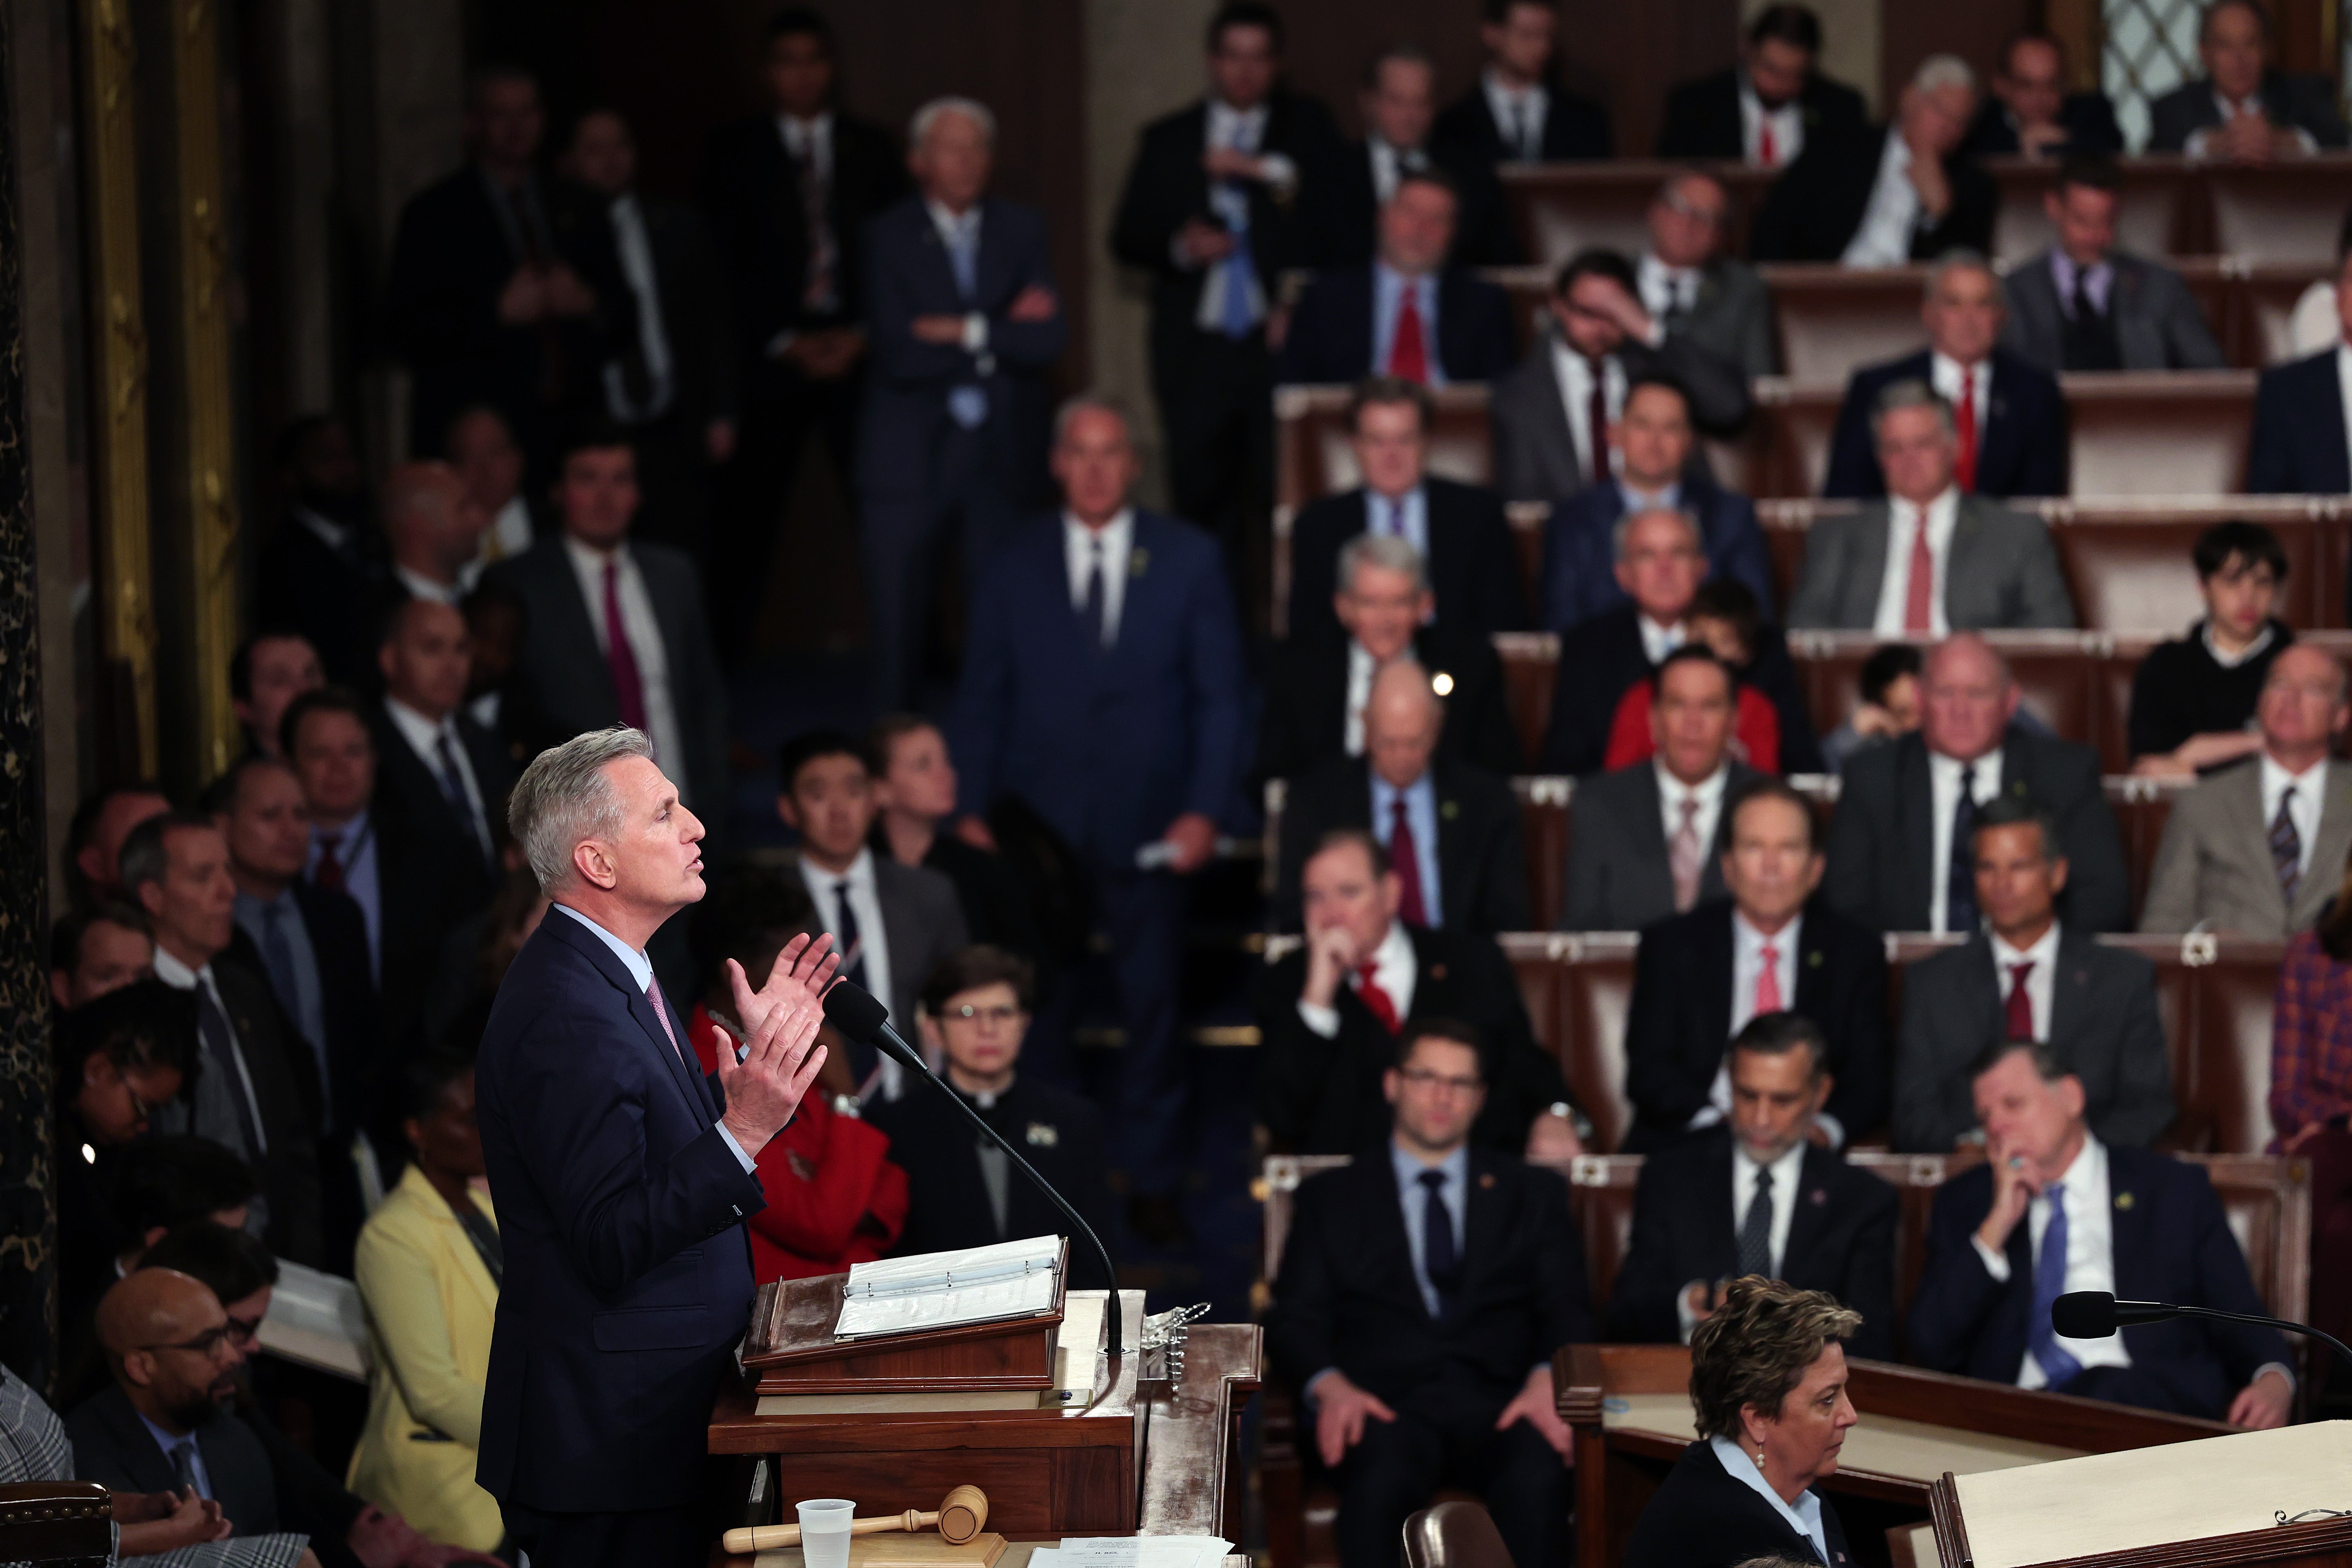 Speaker of the House Kevin McCarthy delivers remarks after being elected as speaker on 7 January 2023